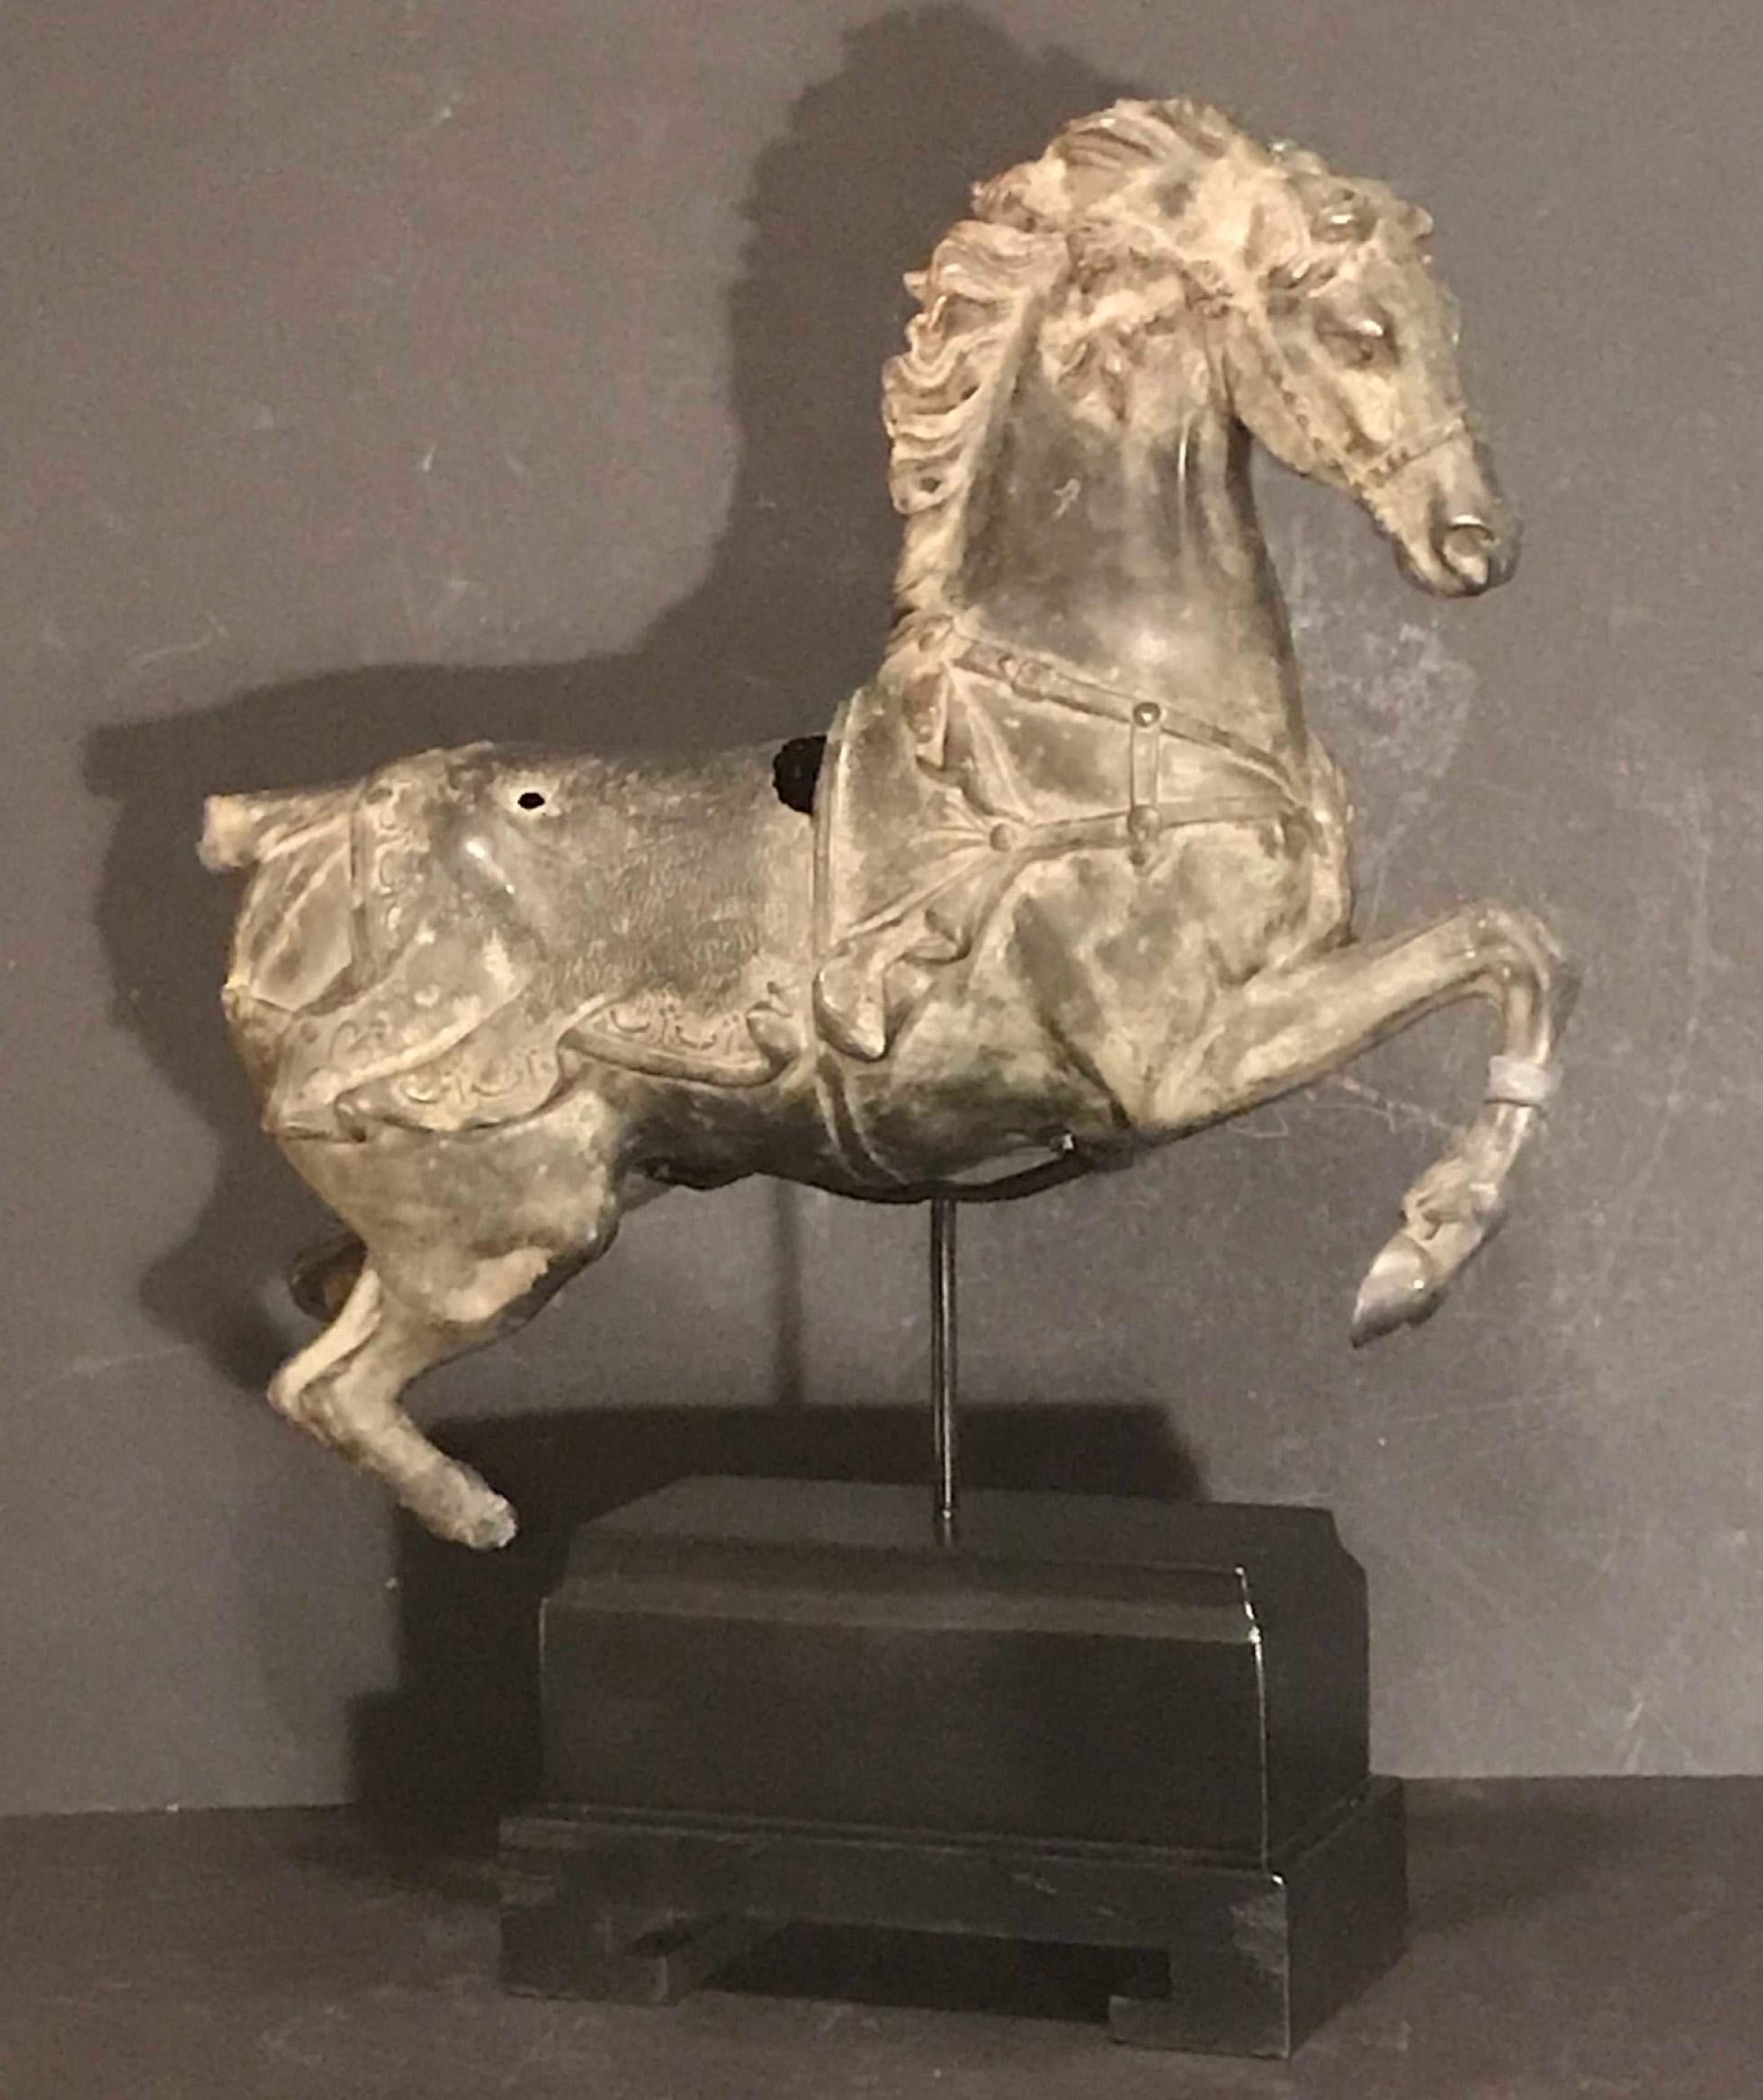 This beautiful Chinese Equine statue is of great workmanship. It is made of bronzed metal with an excellent patina. The horse sculpture is modeled in perfect style, with intricate details and it shows strength in its forward movements. Age has left